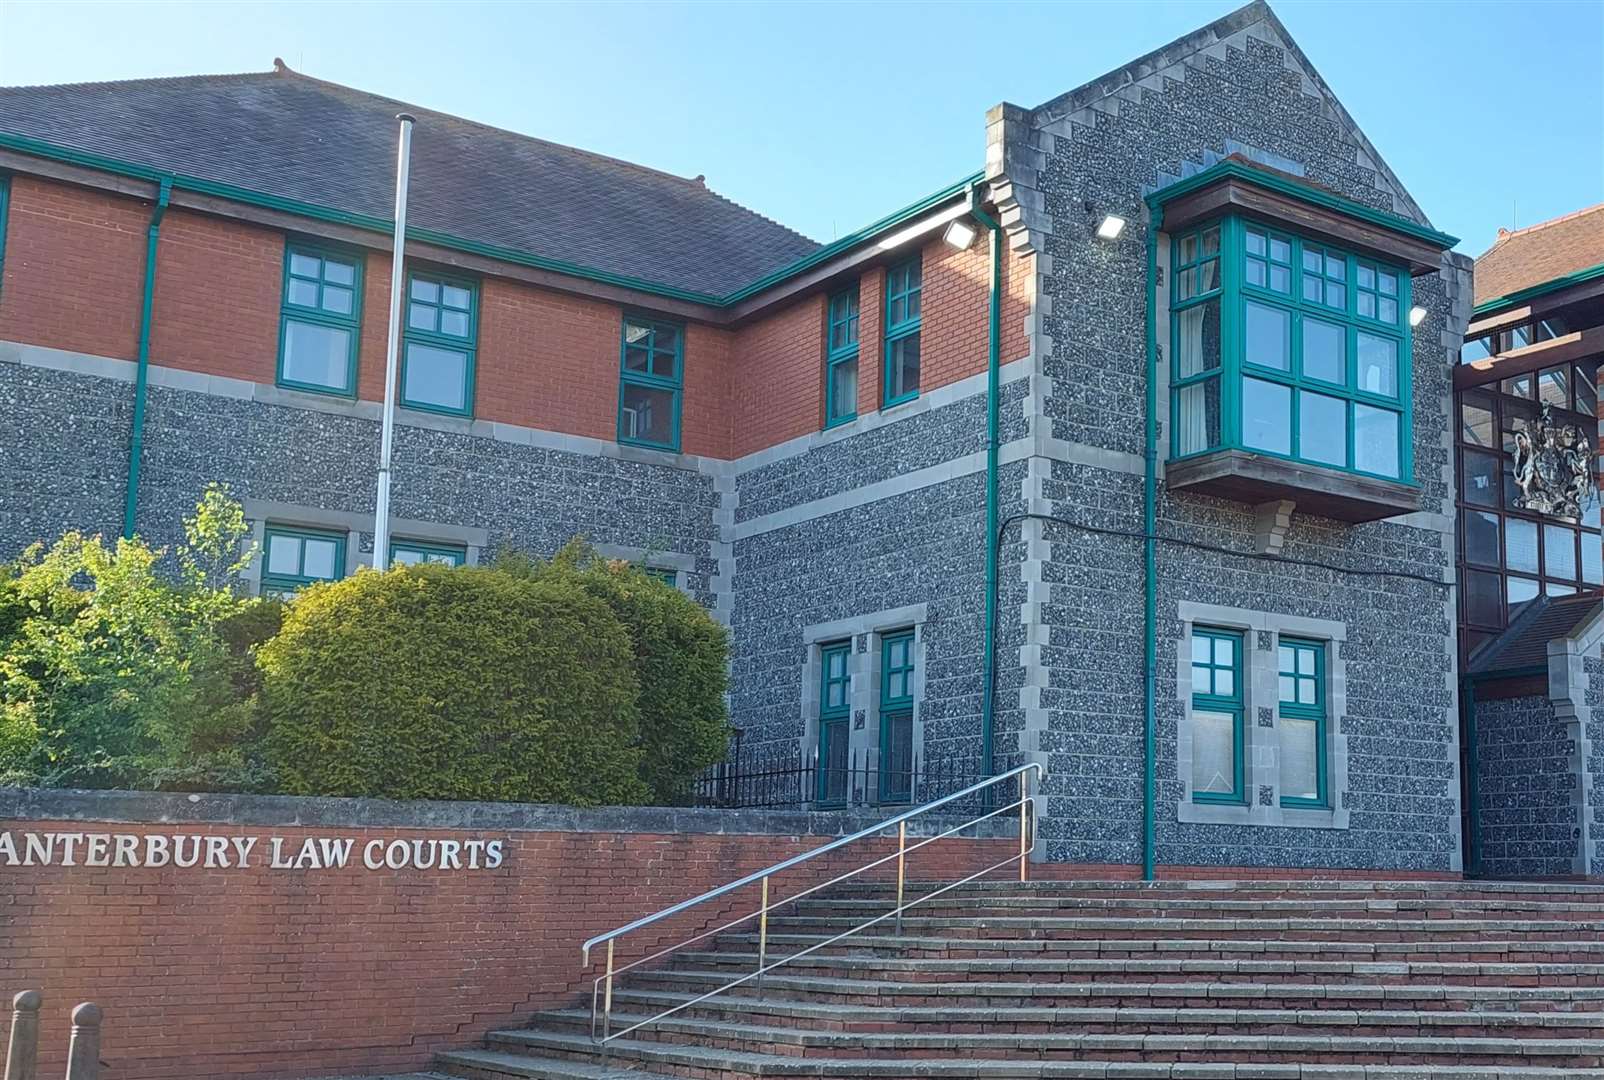 Steve Liddle was jailed for 18 months at Canterbury Crown Court